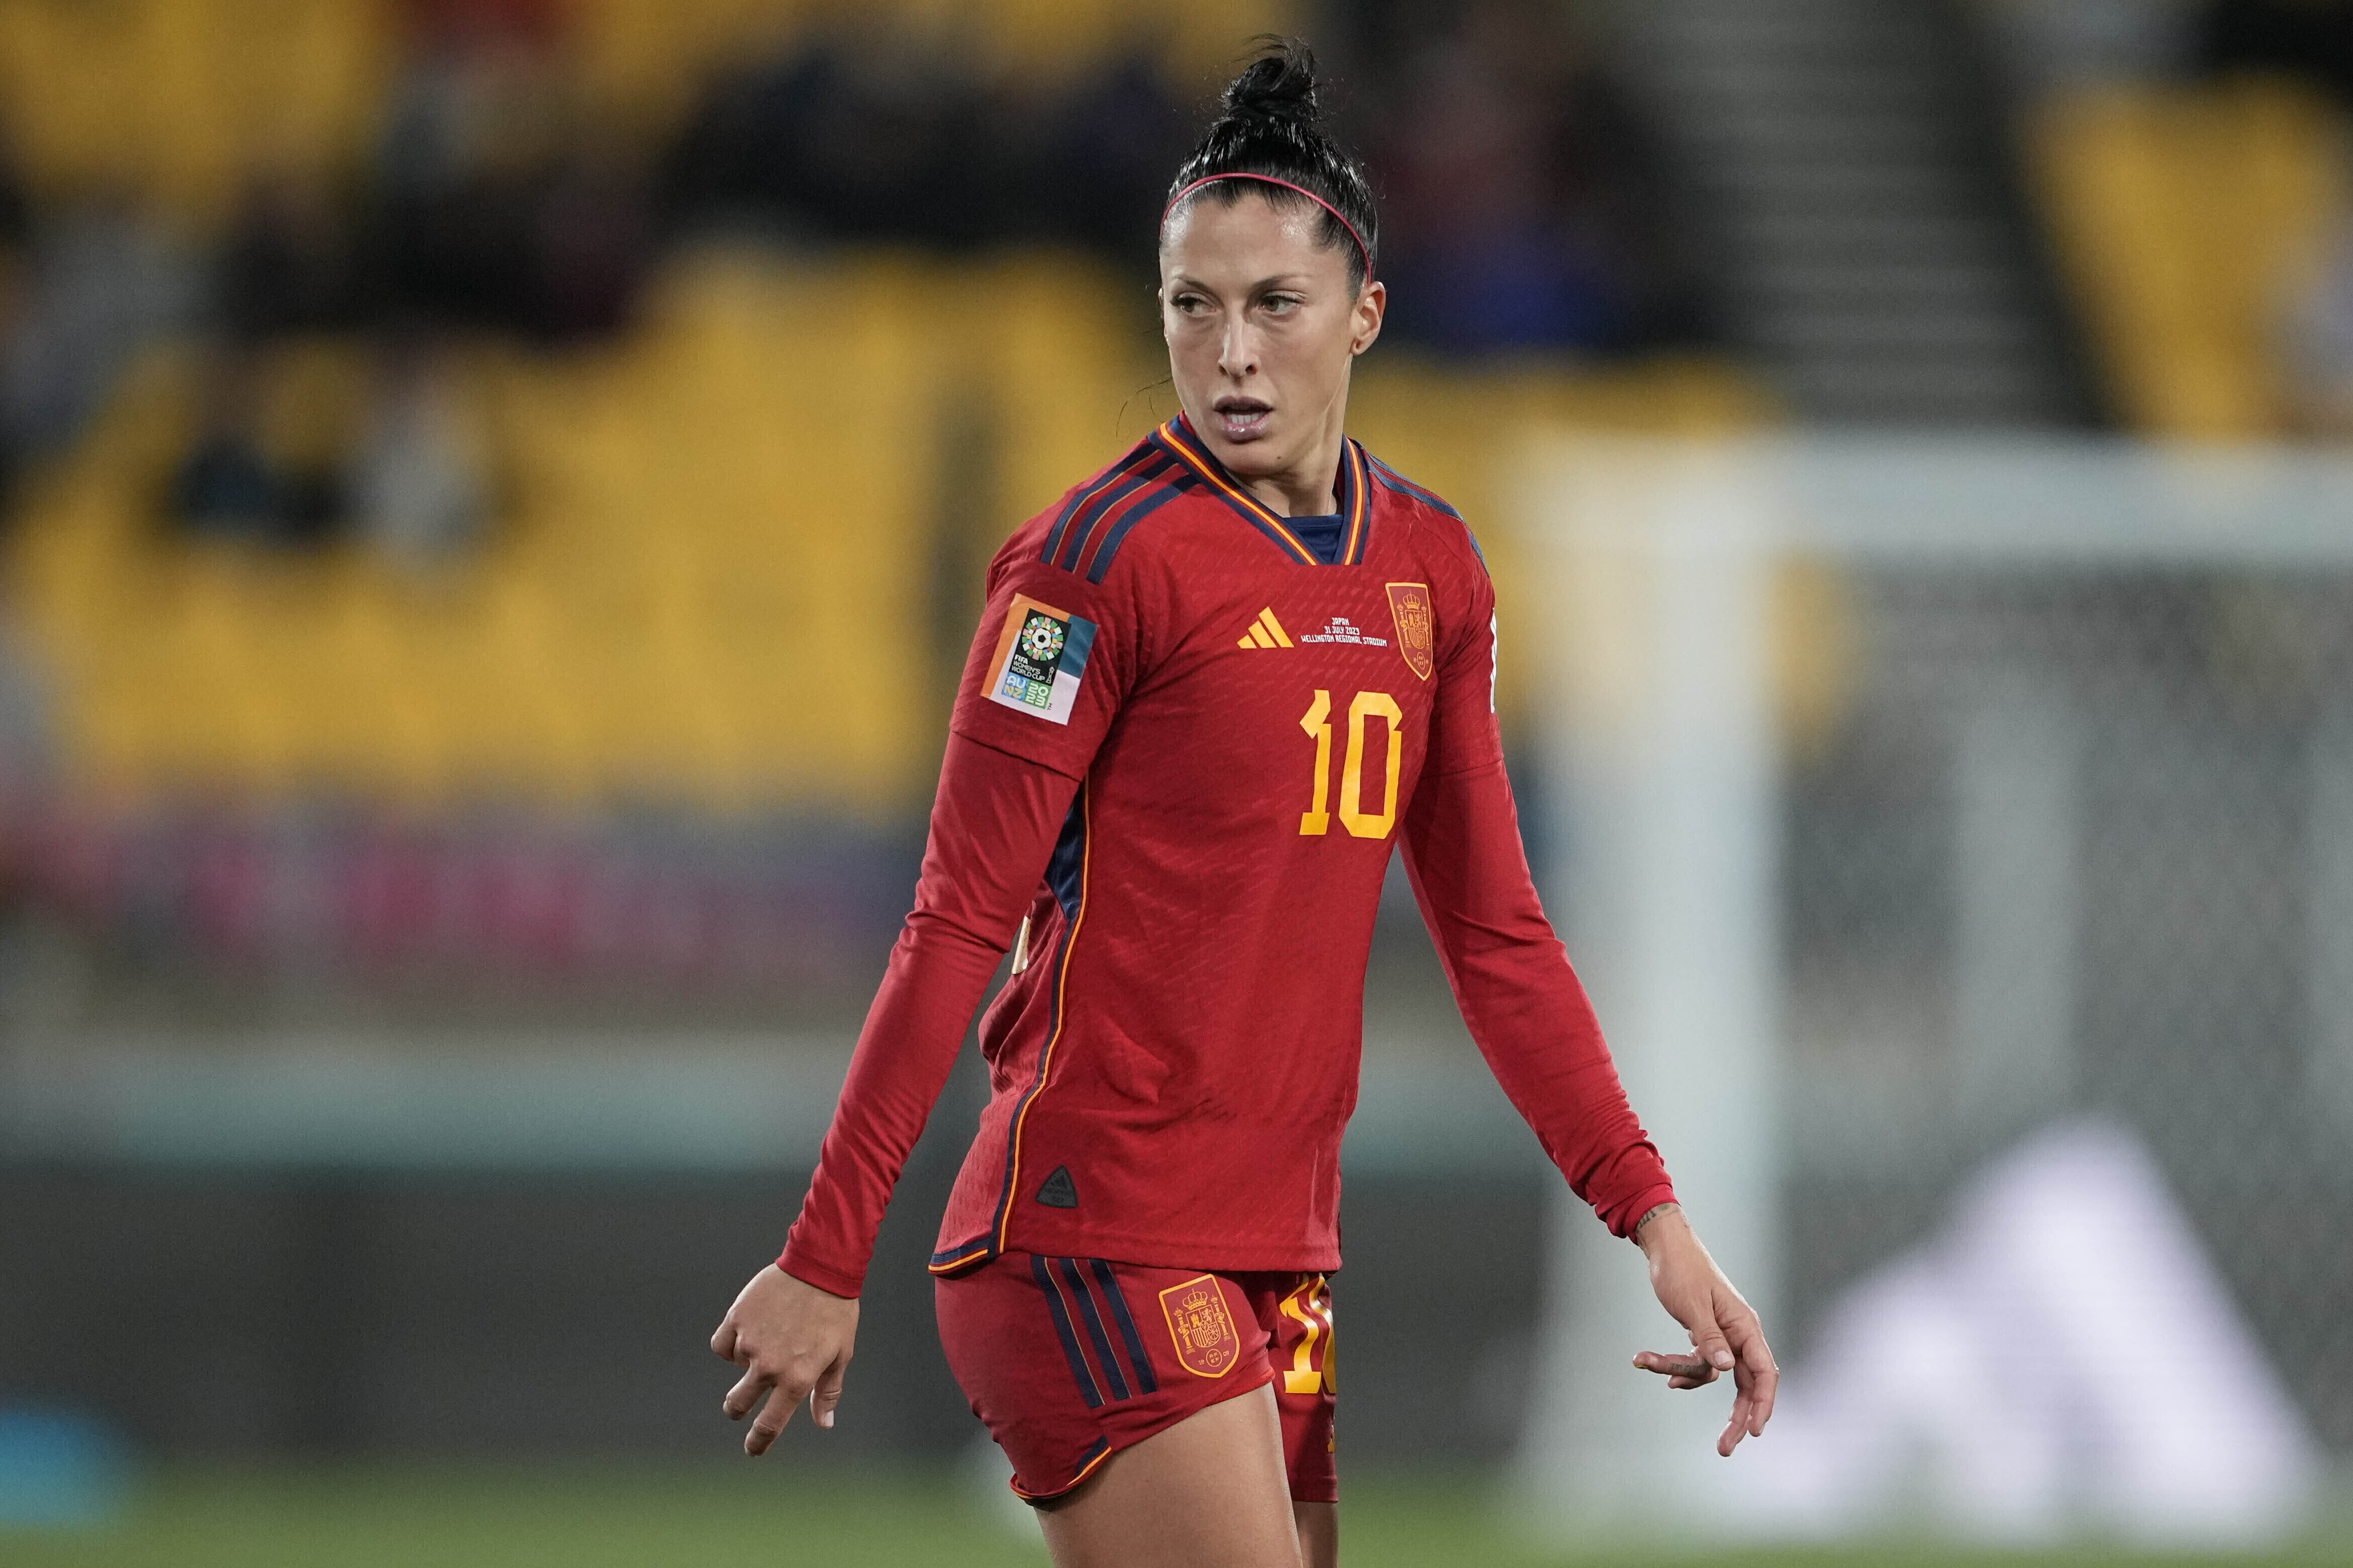 Spanish soccer player Jenni Hermoso accuses Luis Rubiales of sexual assault for World Cup kiss hq nude pic